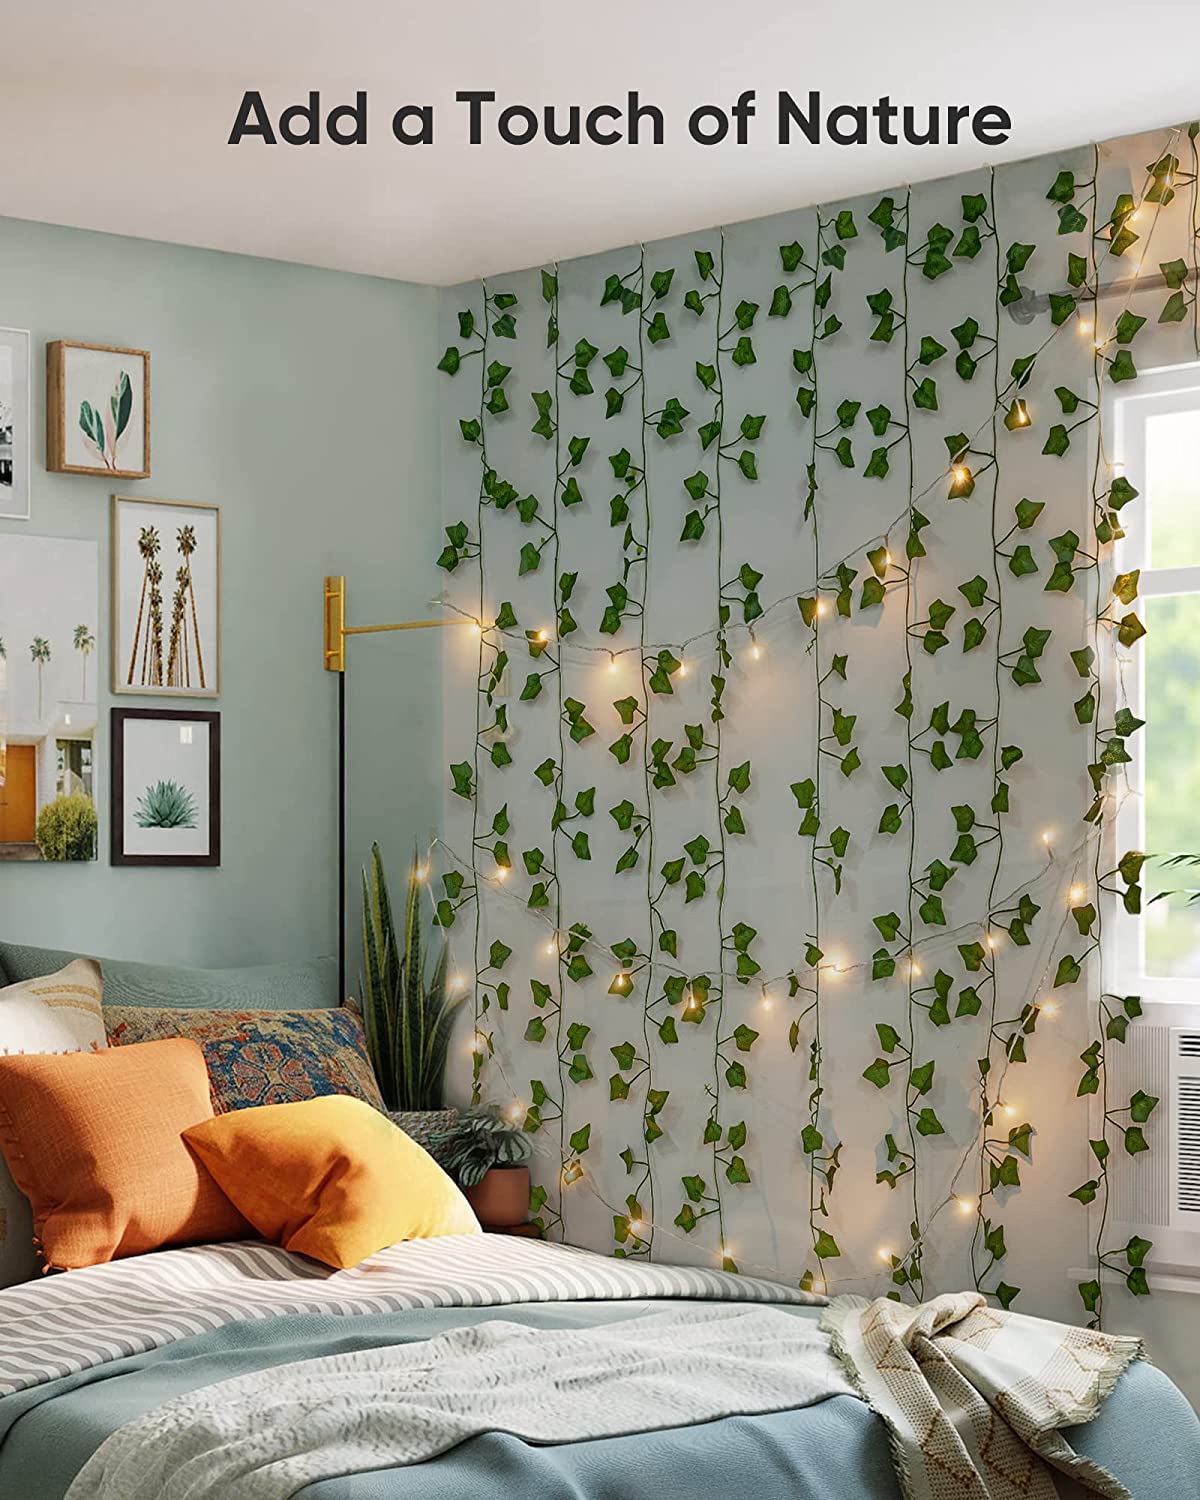 Light Up Your Bedroom with These Aesthetically Pleasing Ideas